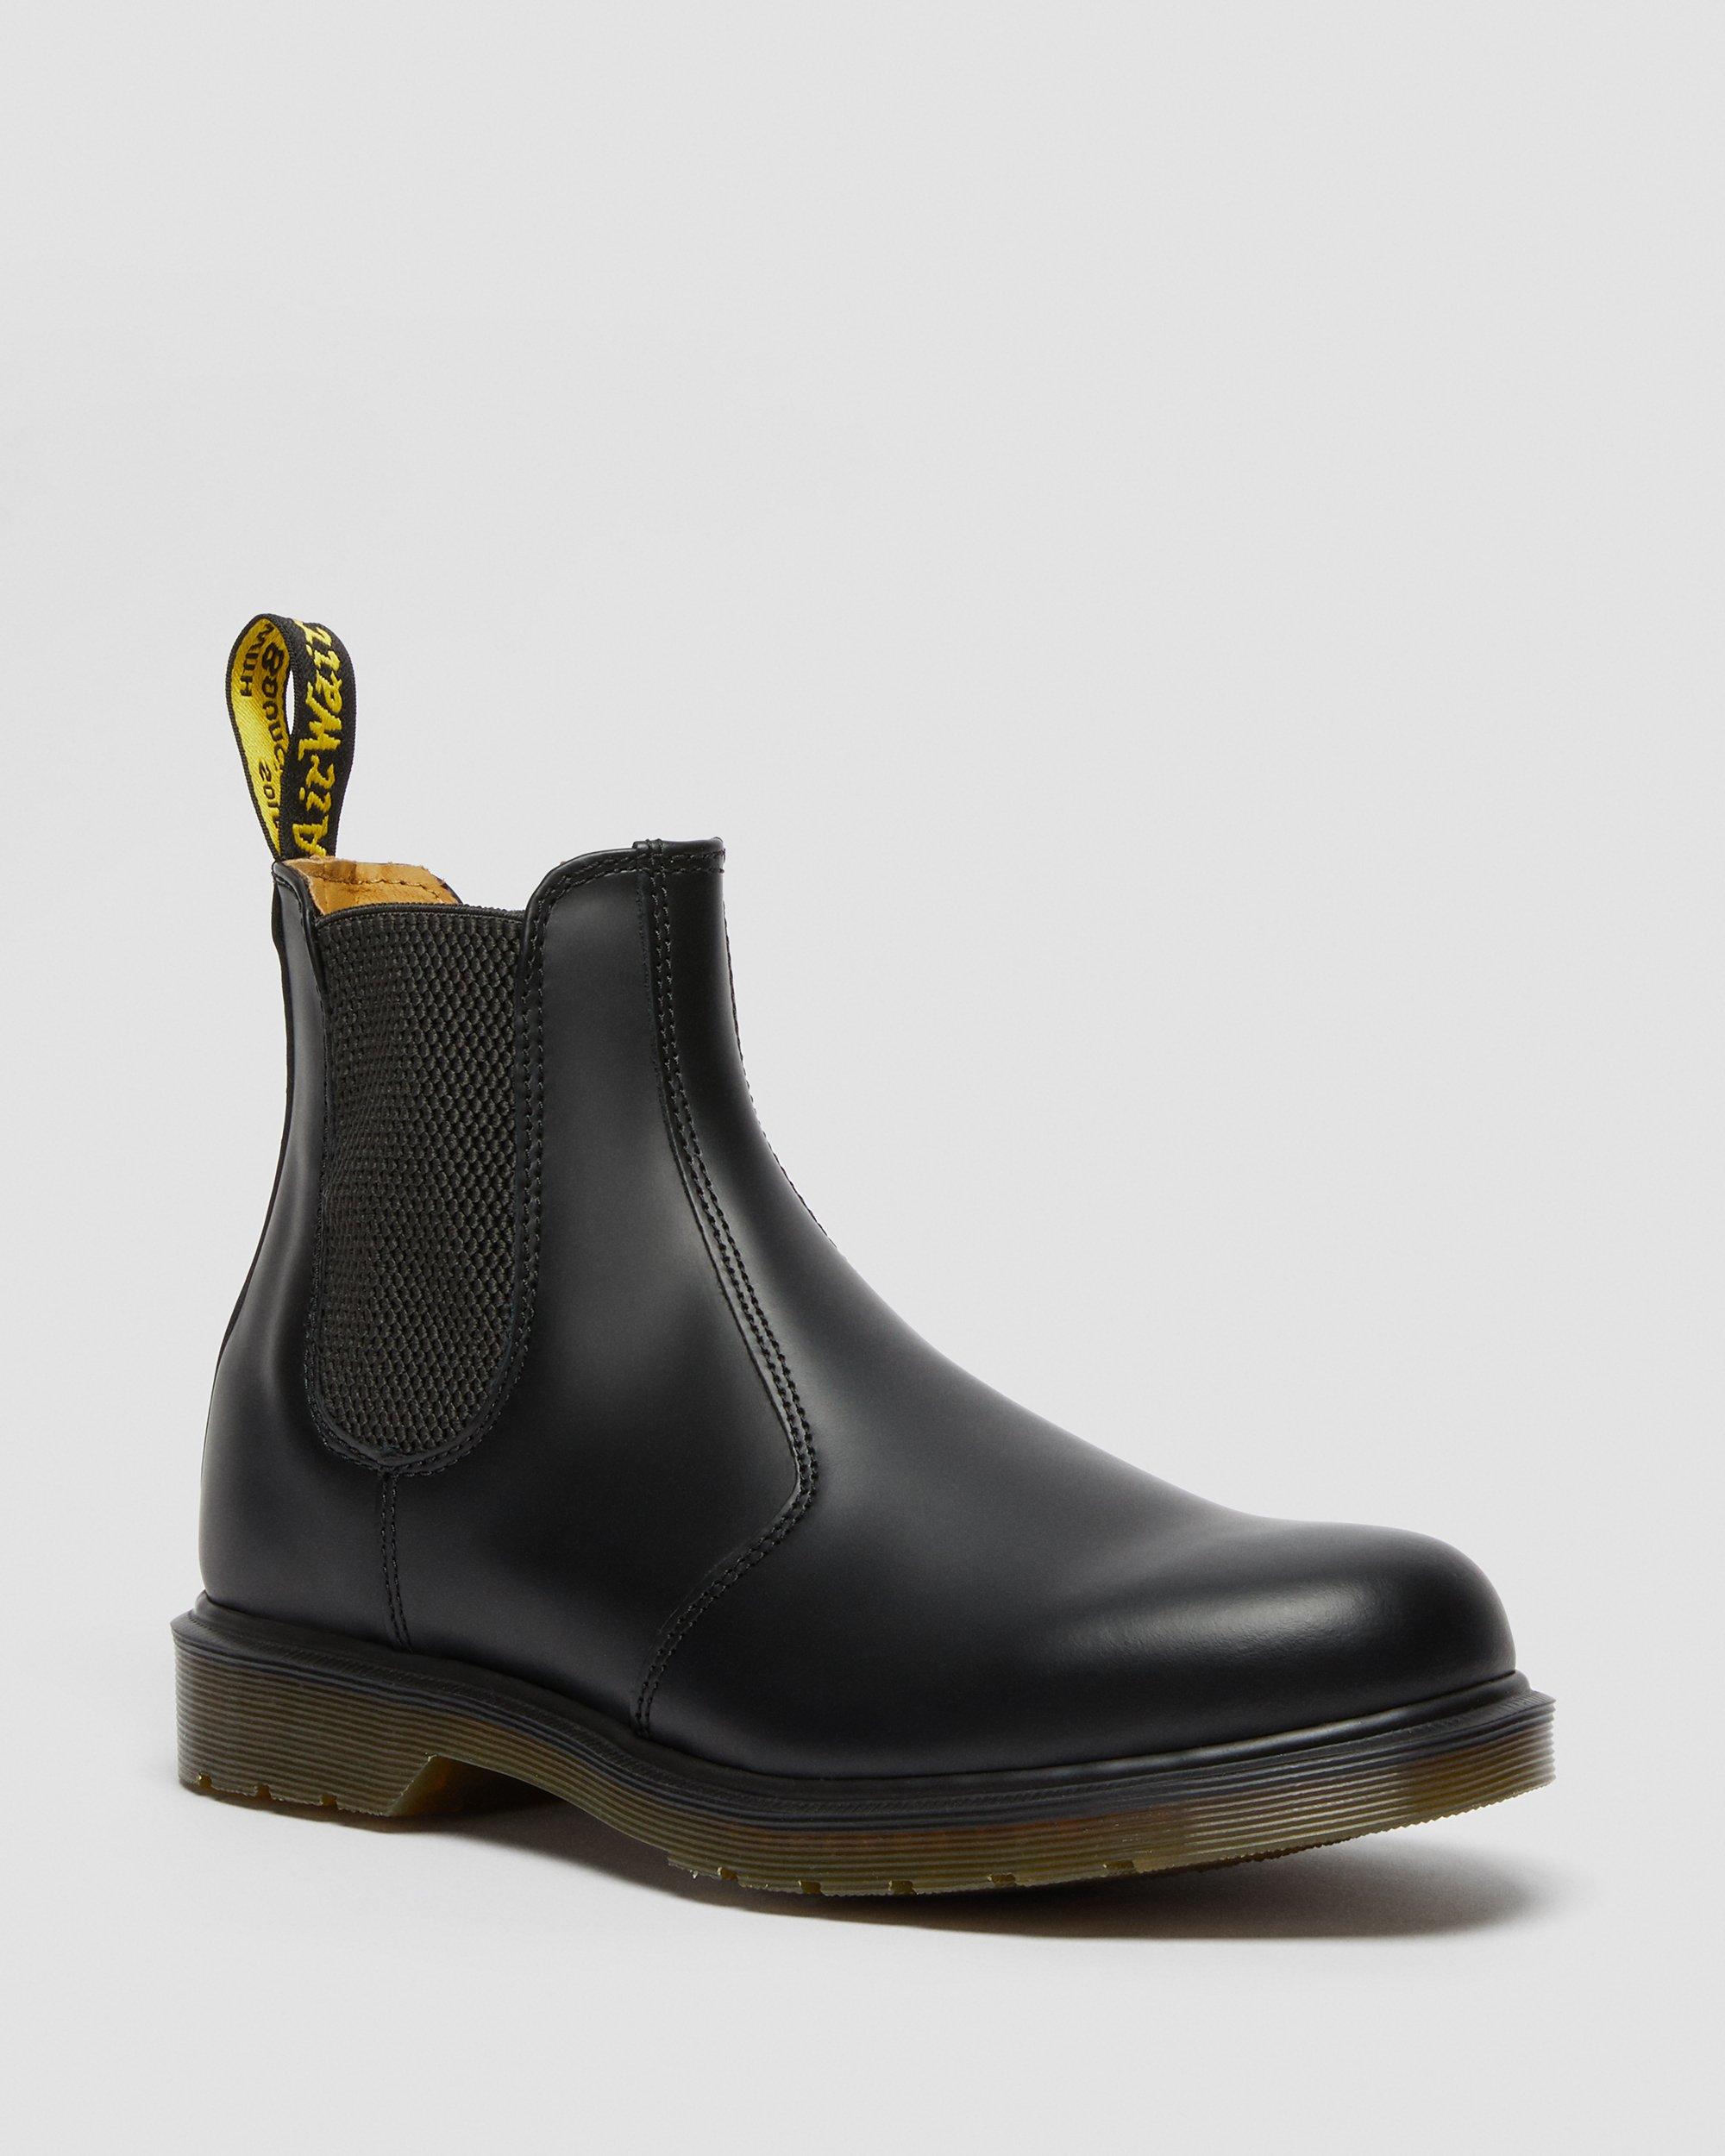 2976 Smooth Leather Chelsea Boots in Black, Dr. Martens